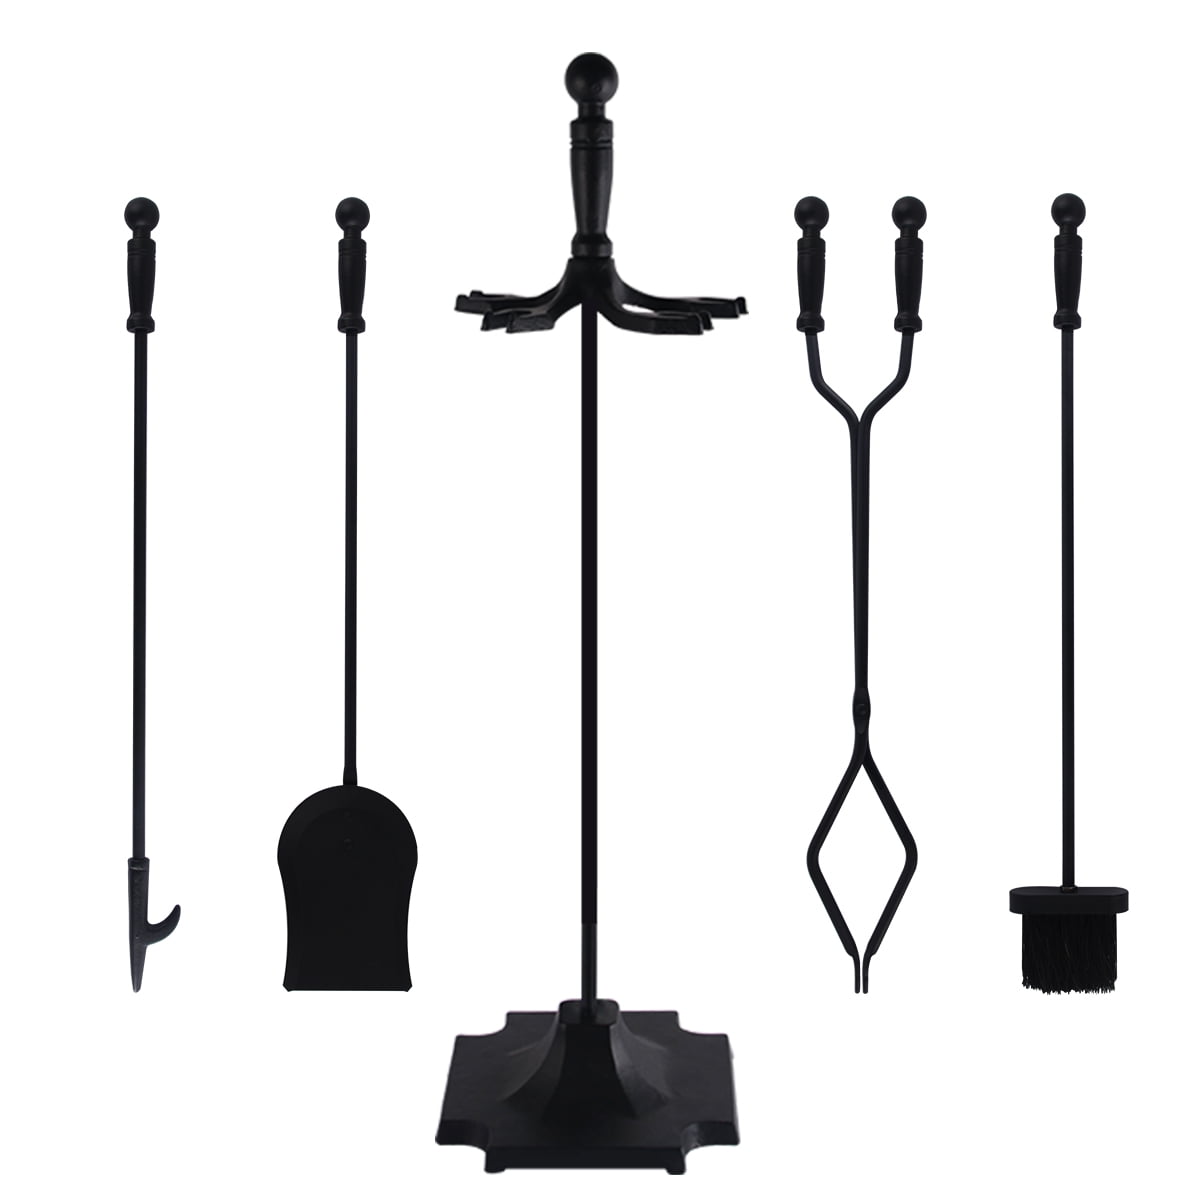 Shovel Hearth Accessories Including Tongs Stand Type 2 Fire Pits Poker & Broom，Antique Brush Chimney Poker 5 Pcs Fireplace 31 Inch Large Black Handle Wrought Iron Fire Place Tool Sets